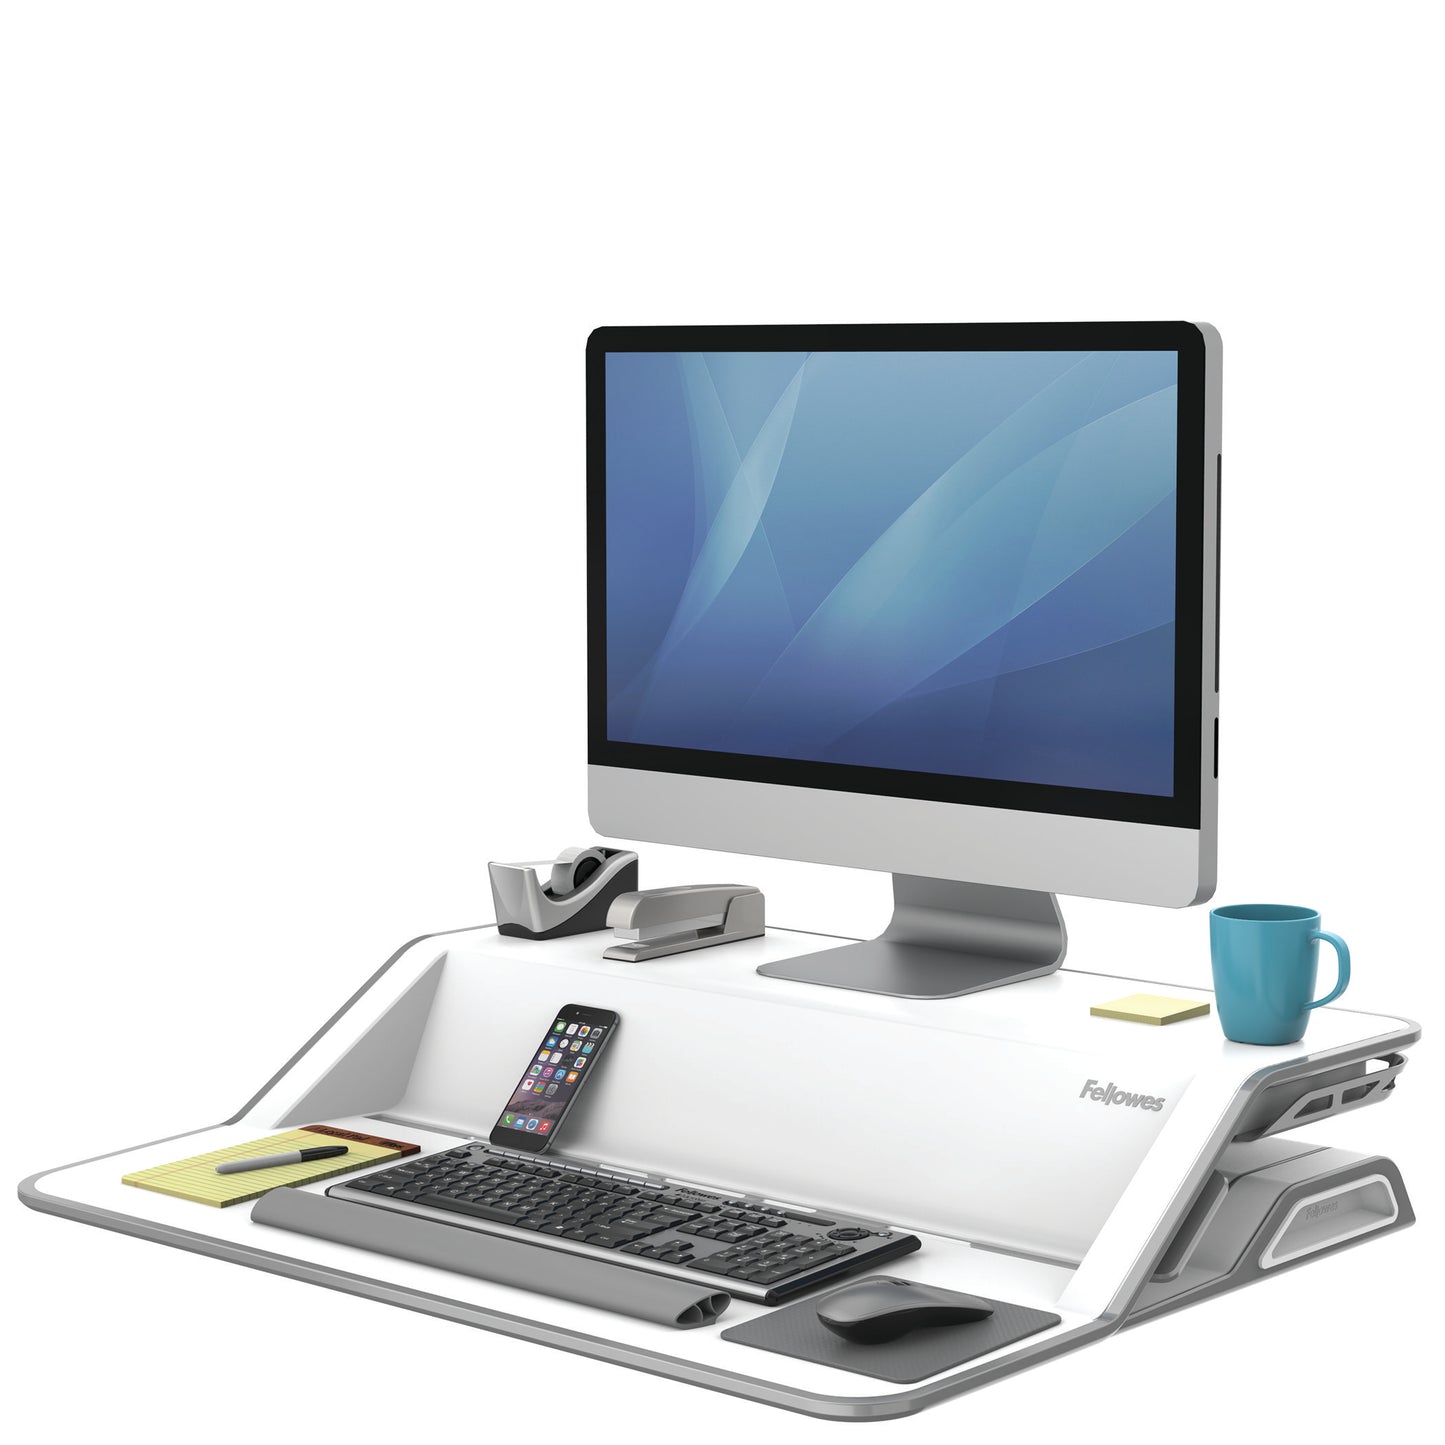 BUY FELLOWES LOTUS Sit Stand Workstation with FREE SHIPPING 9901 white